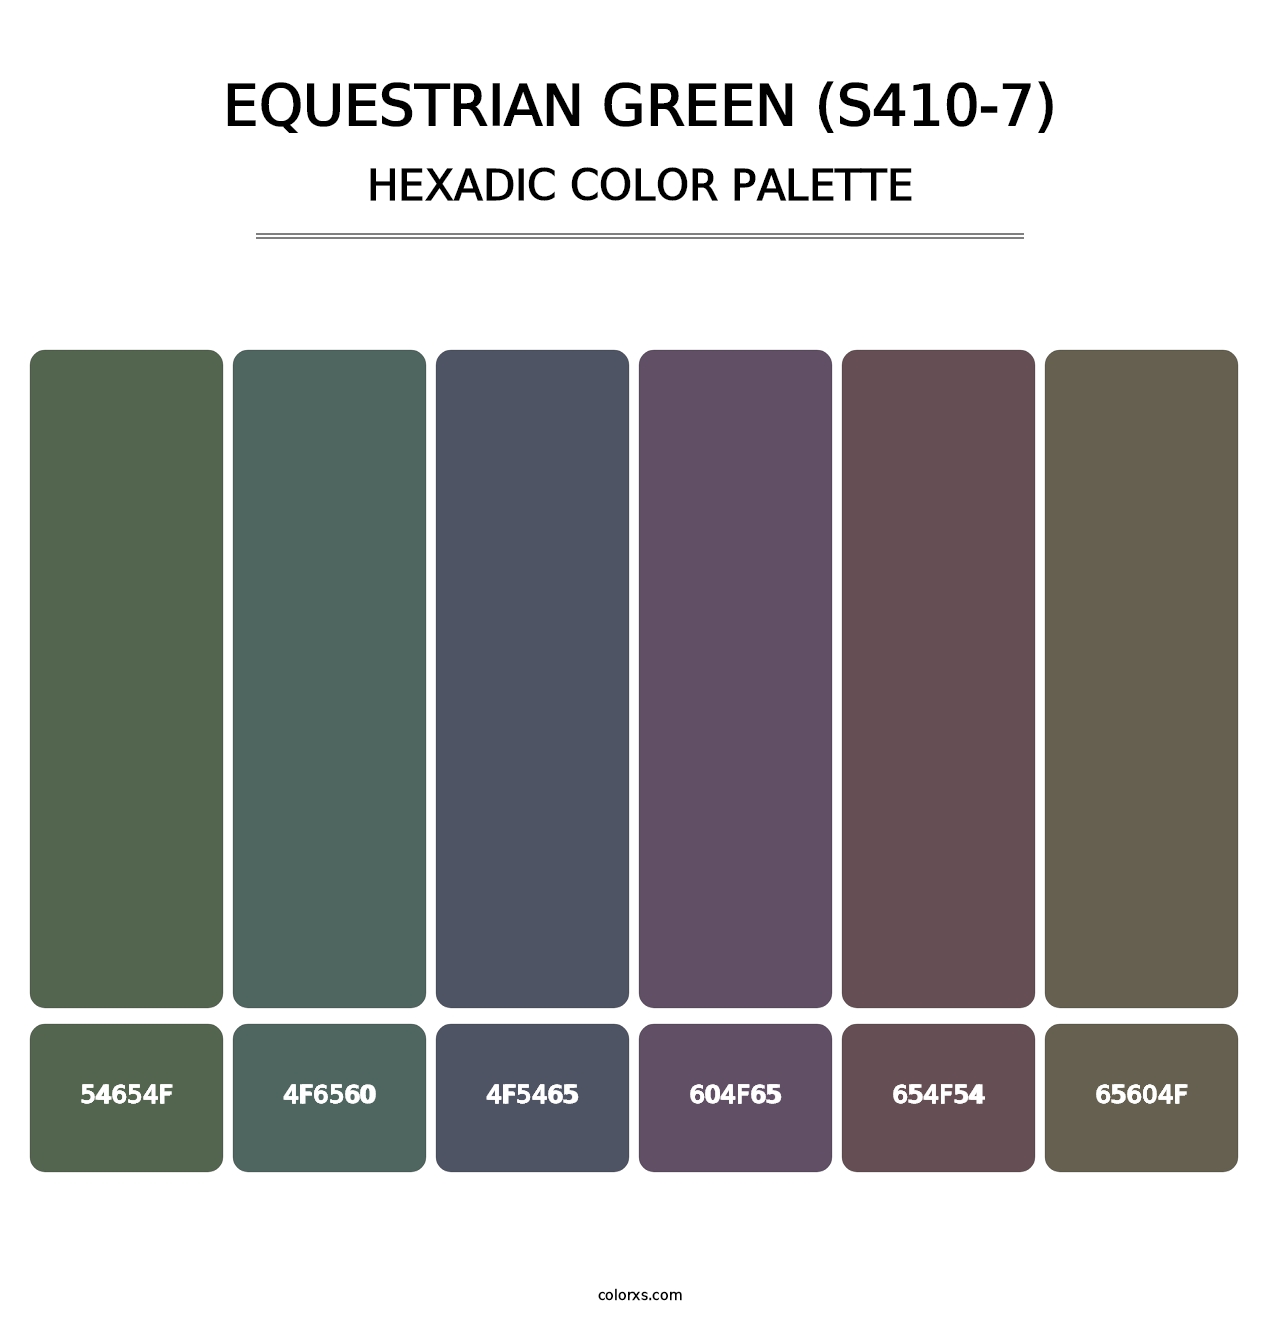 Equestrian Green (S410-7) - Hexadic Color Palette